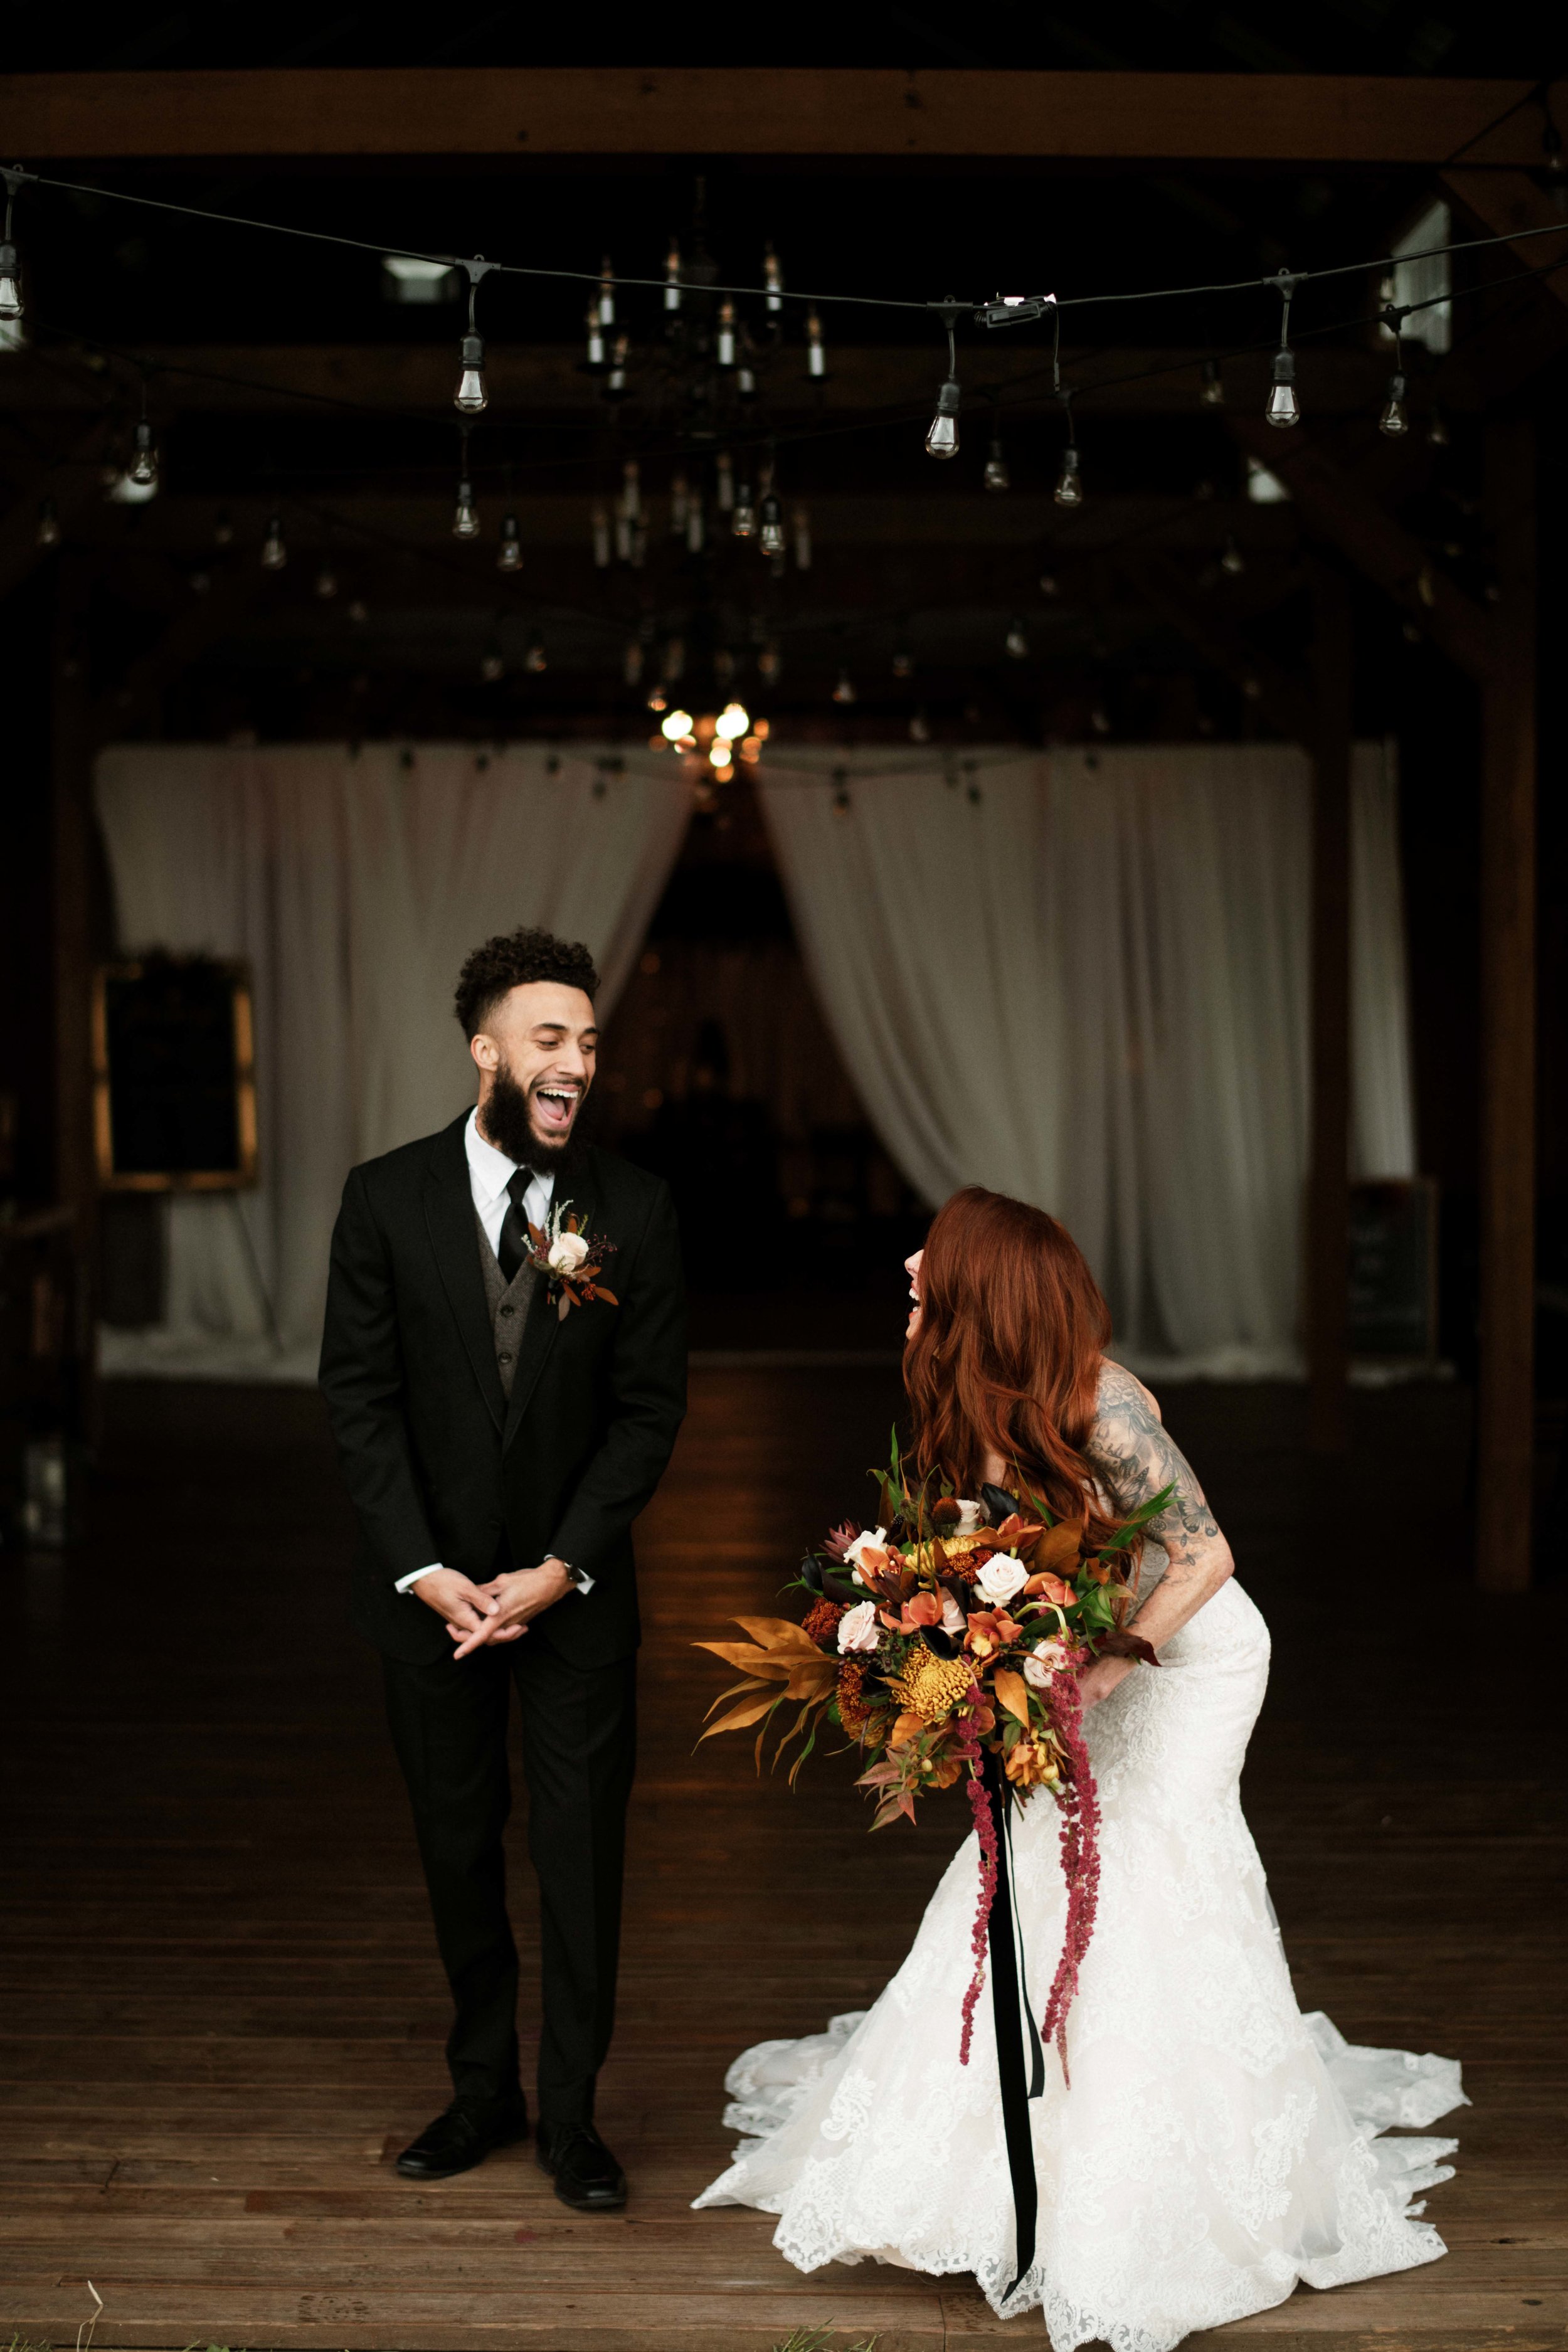 Laughing Bride and Groom Fall Wedding Rich Colors